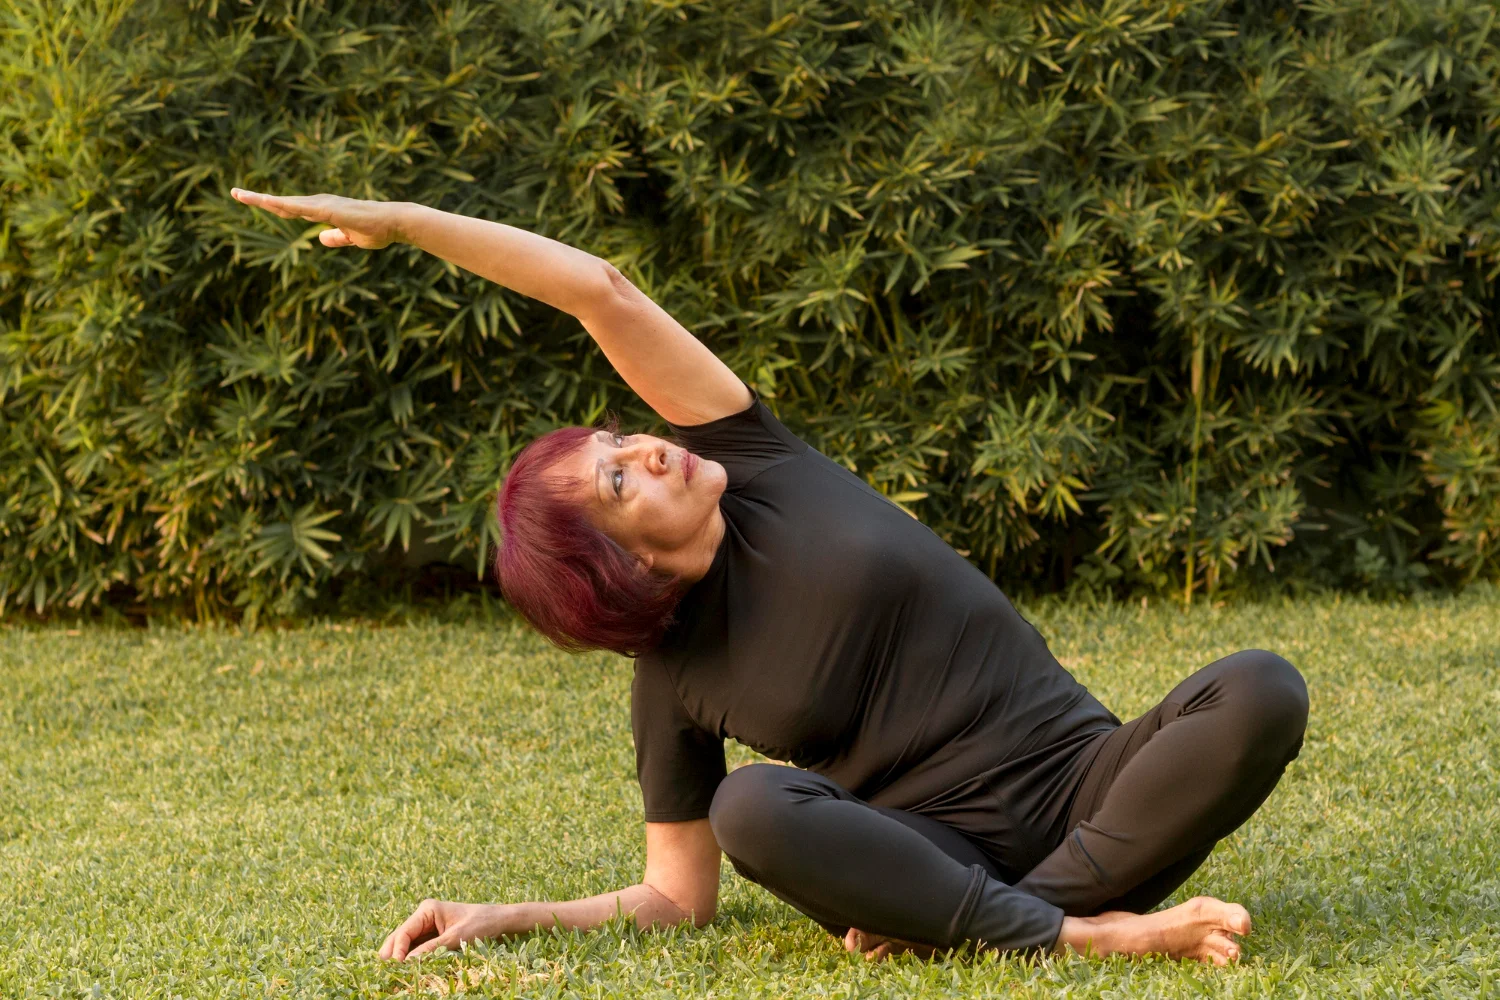 The elderly woman is seated on the grass dressed in a black outfit as she extends her hands above her head gently stretching to one side while practicing yoga